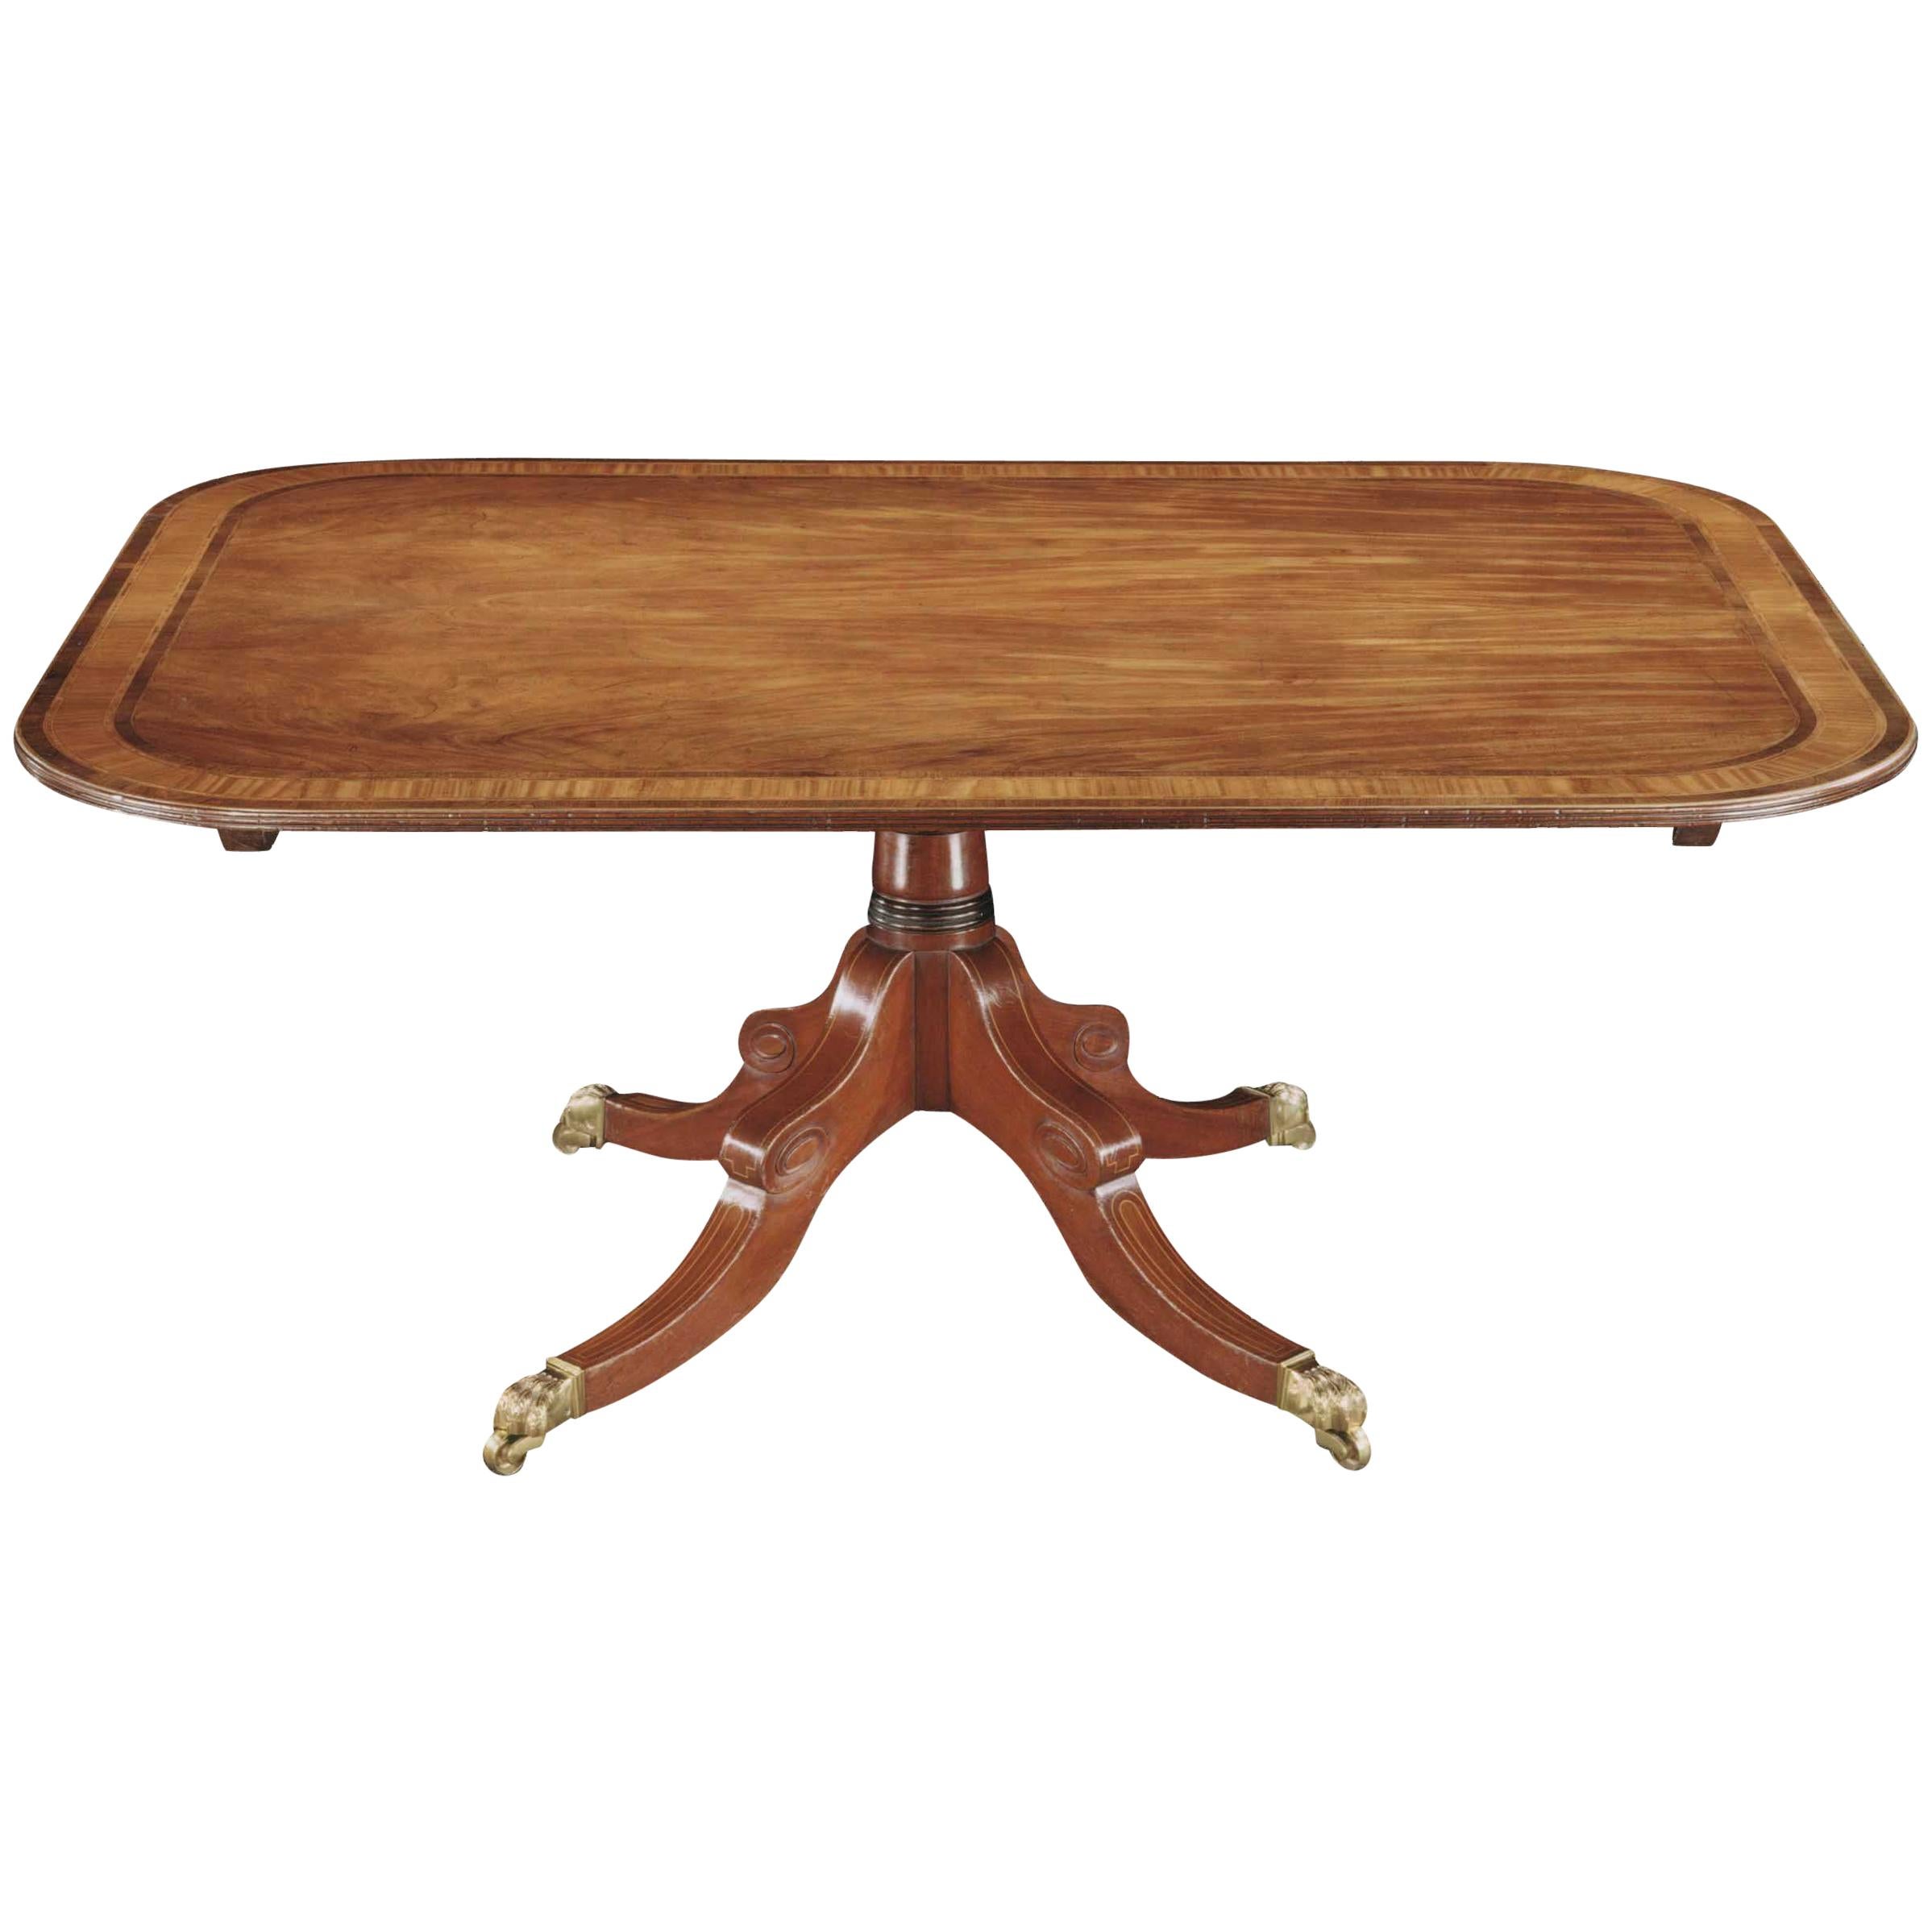 Late George III Mahogany and Satinwood Inlaid Centre Pedestal Dining Table For Sale